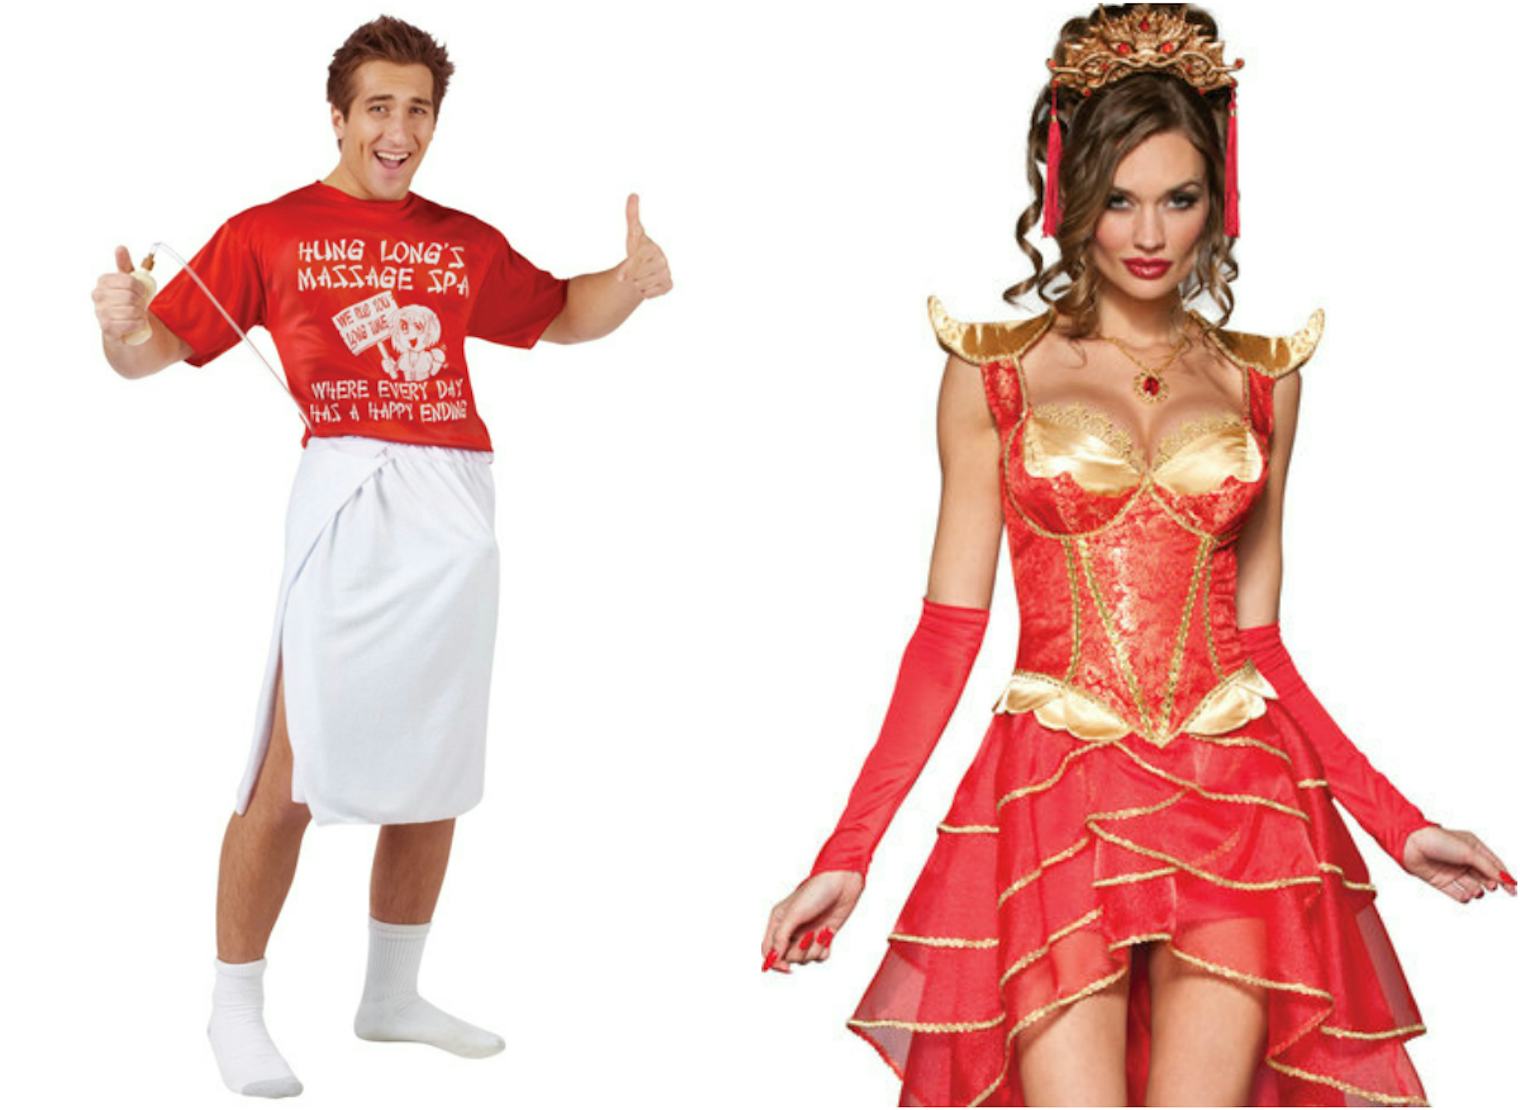 23 Sexist And Racist Halloween Costumes To Never Ever Use Ever